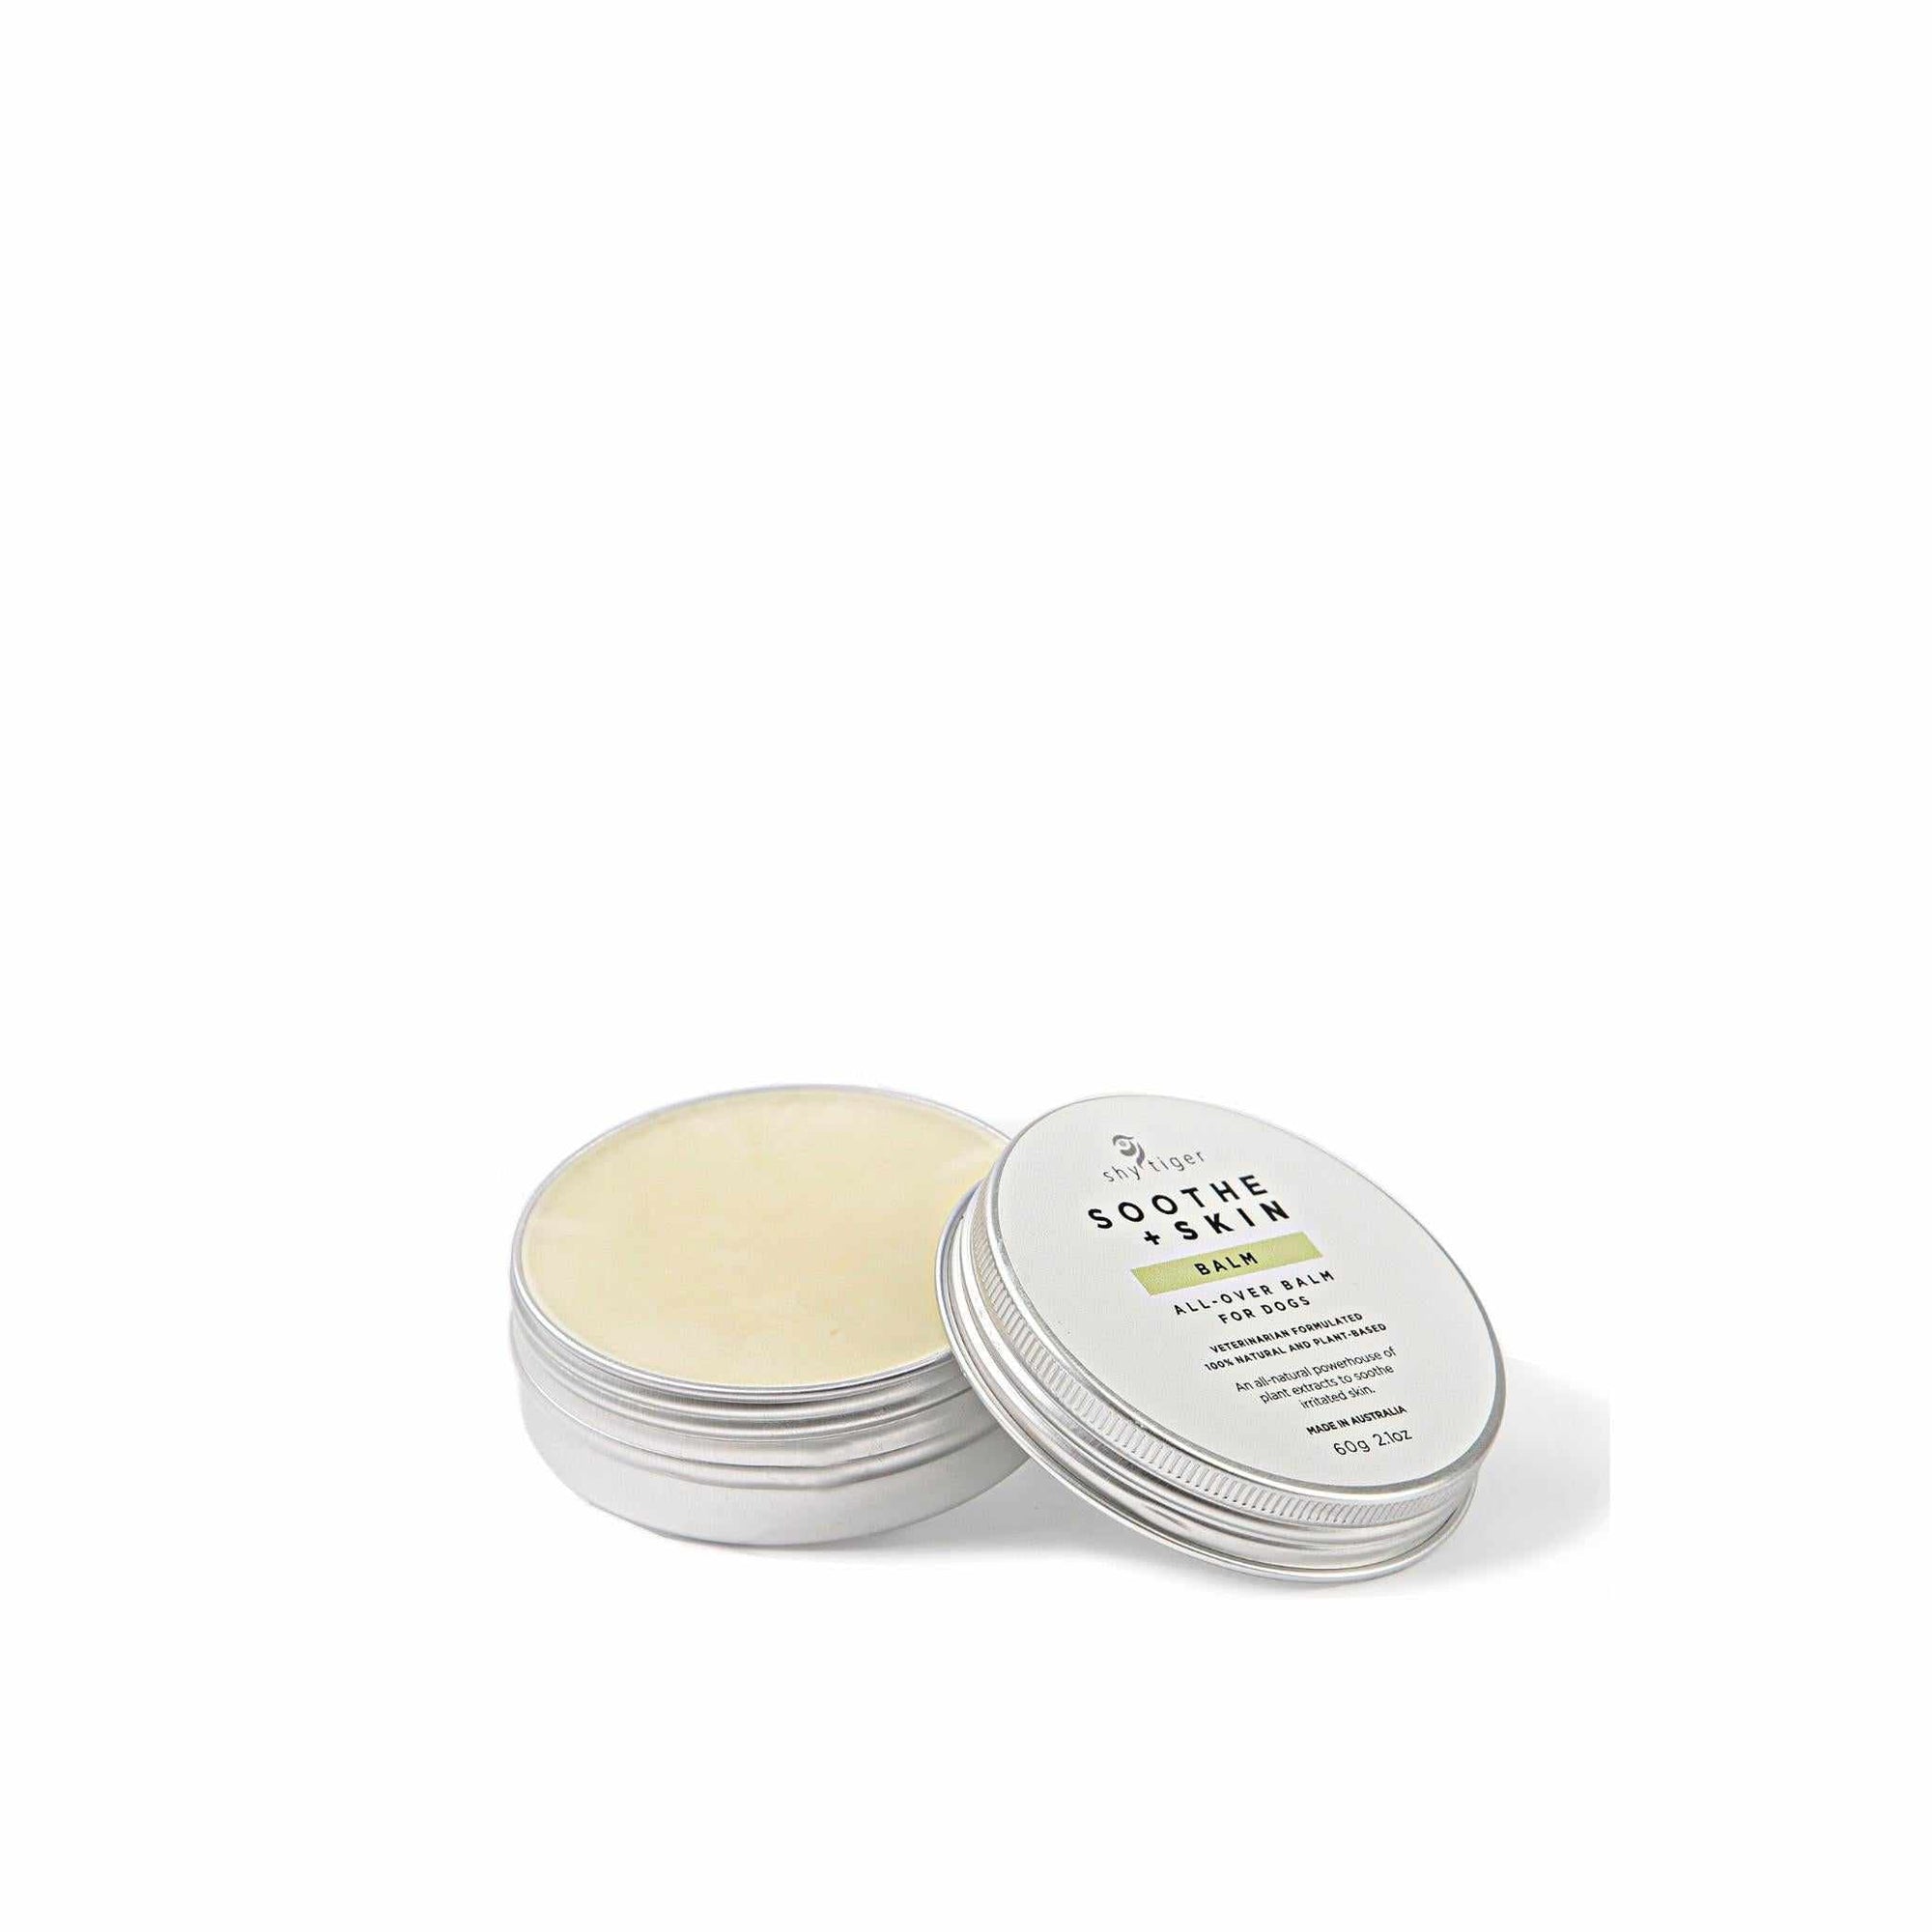 Soothe + Skin Balm - Itch Relief for dogs with skin issues